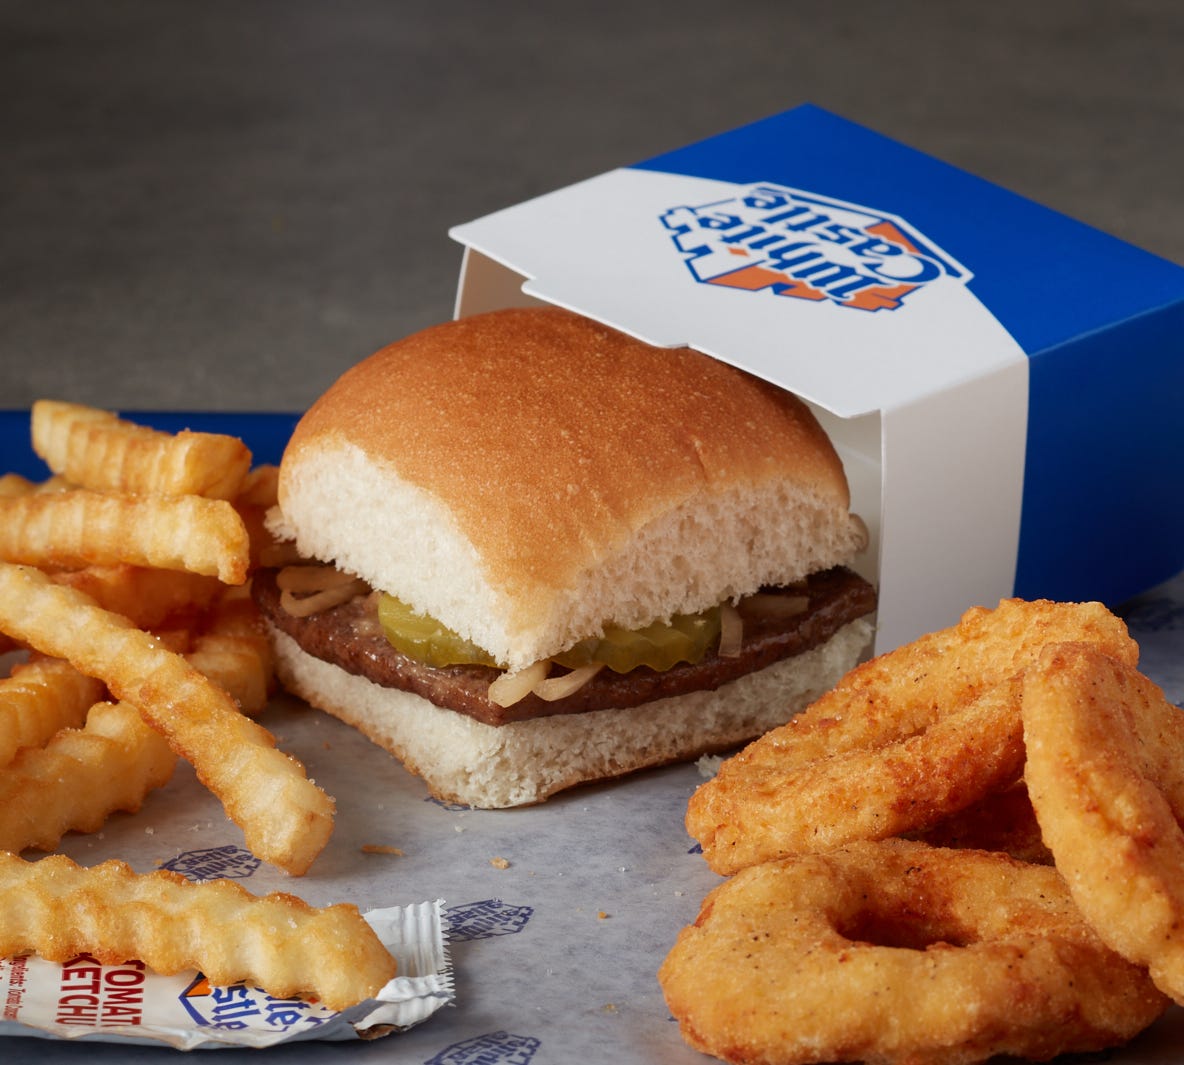 Tickets now on sale for our pop-up White Castle event - Bungalower